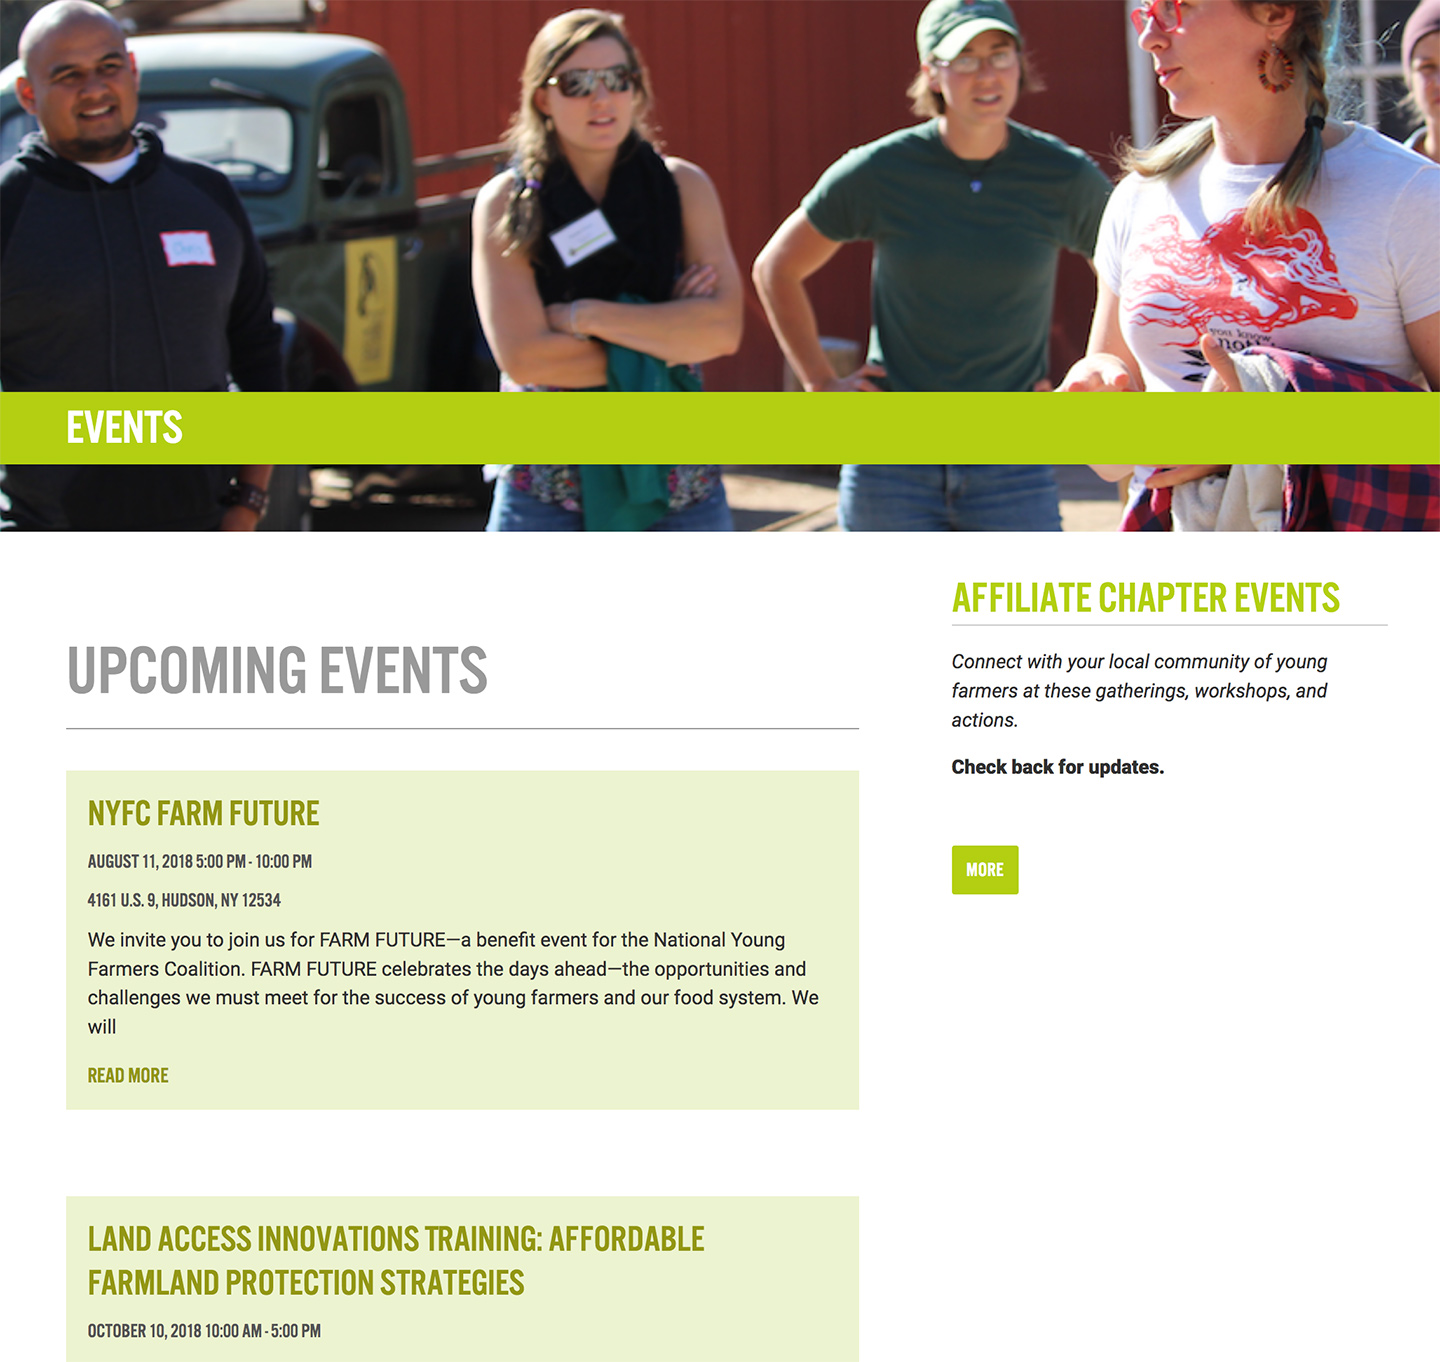 National Young Farmers Coalition: NYFC Events Archive